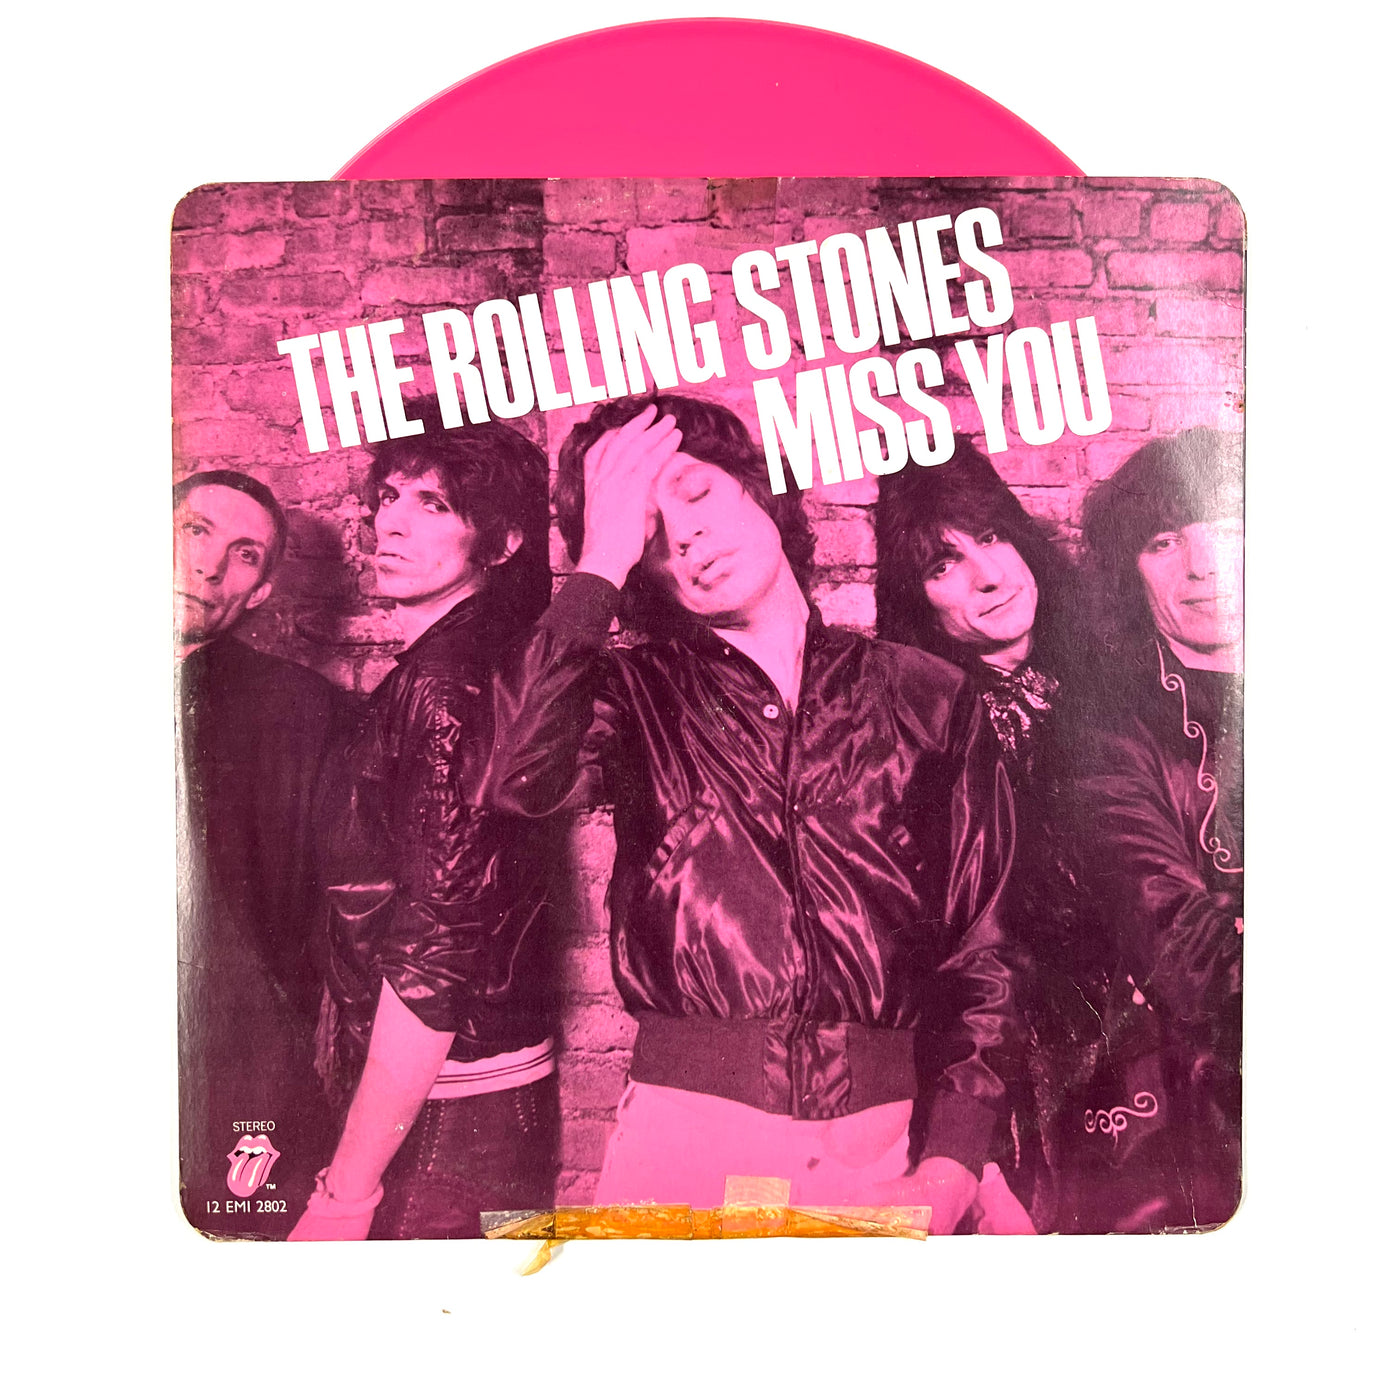 The Rolling Stones - Miss You